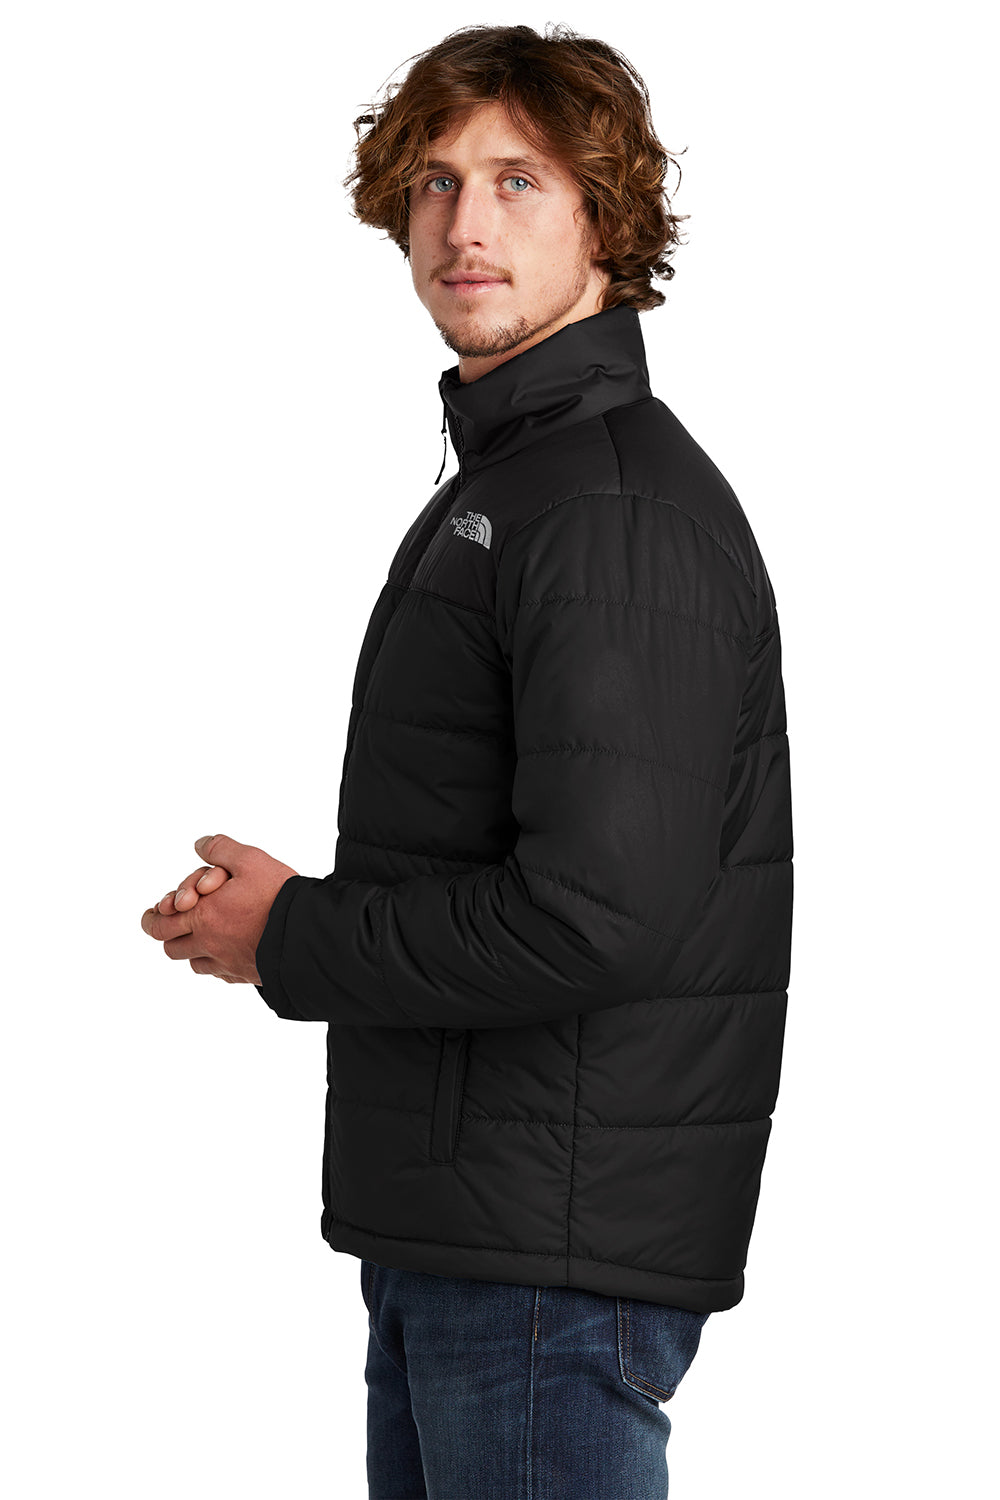 The North Face NF0A7V6J Mens Everyday Insulated Full Zip Jacket Black Side